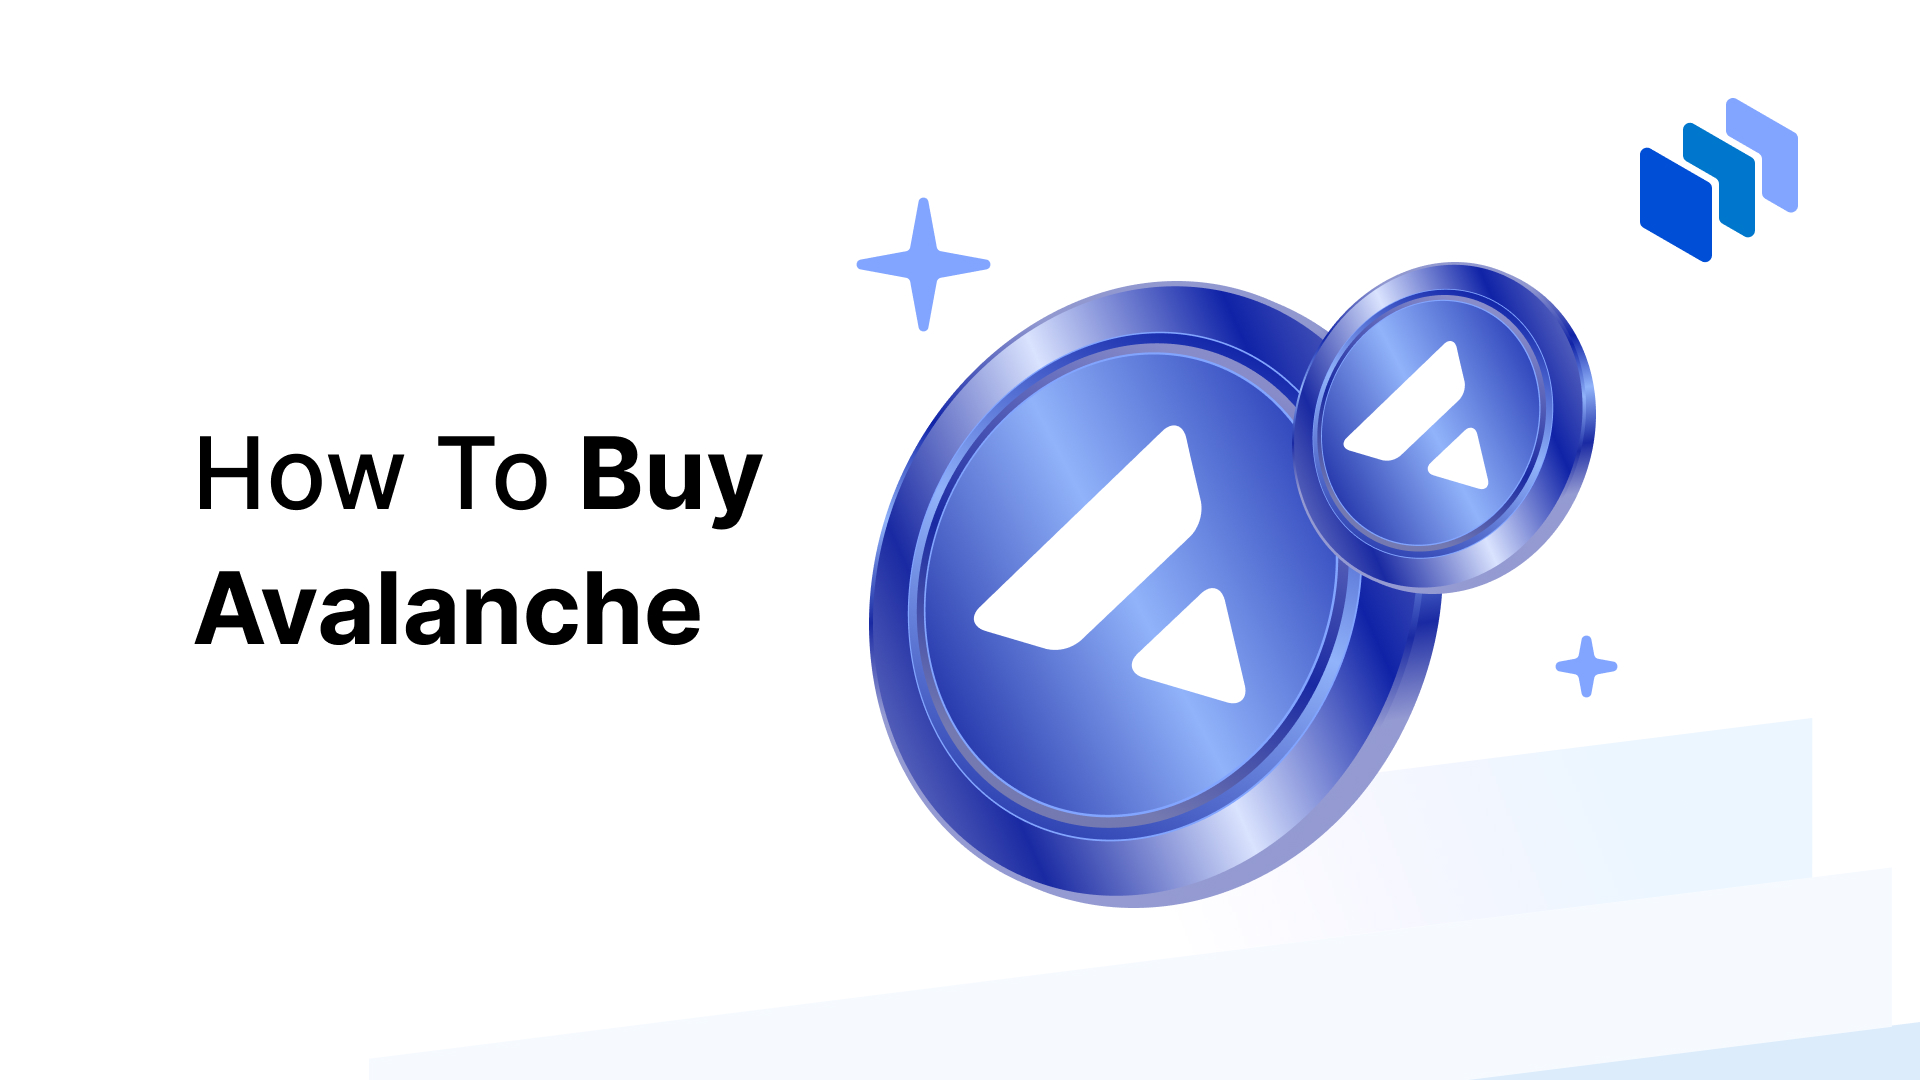 How To Buy Avalanche